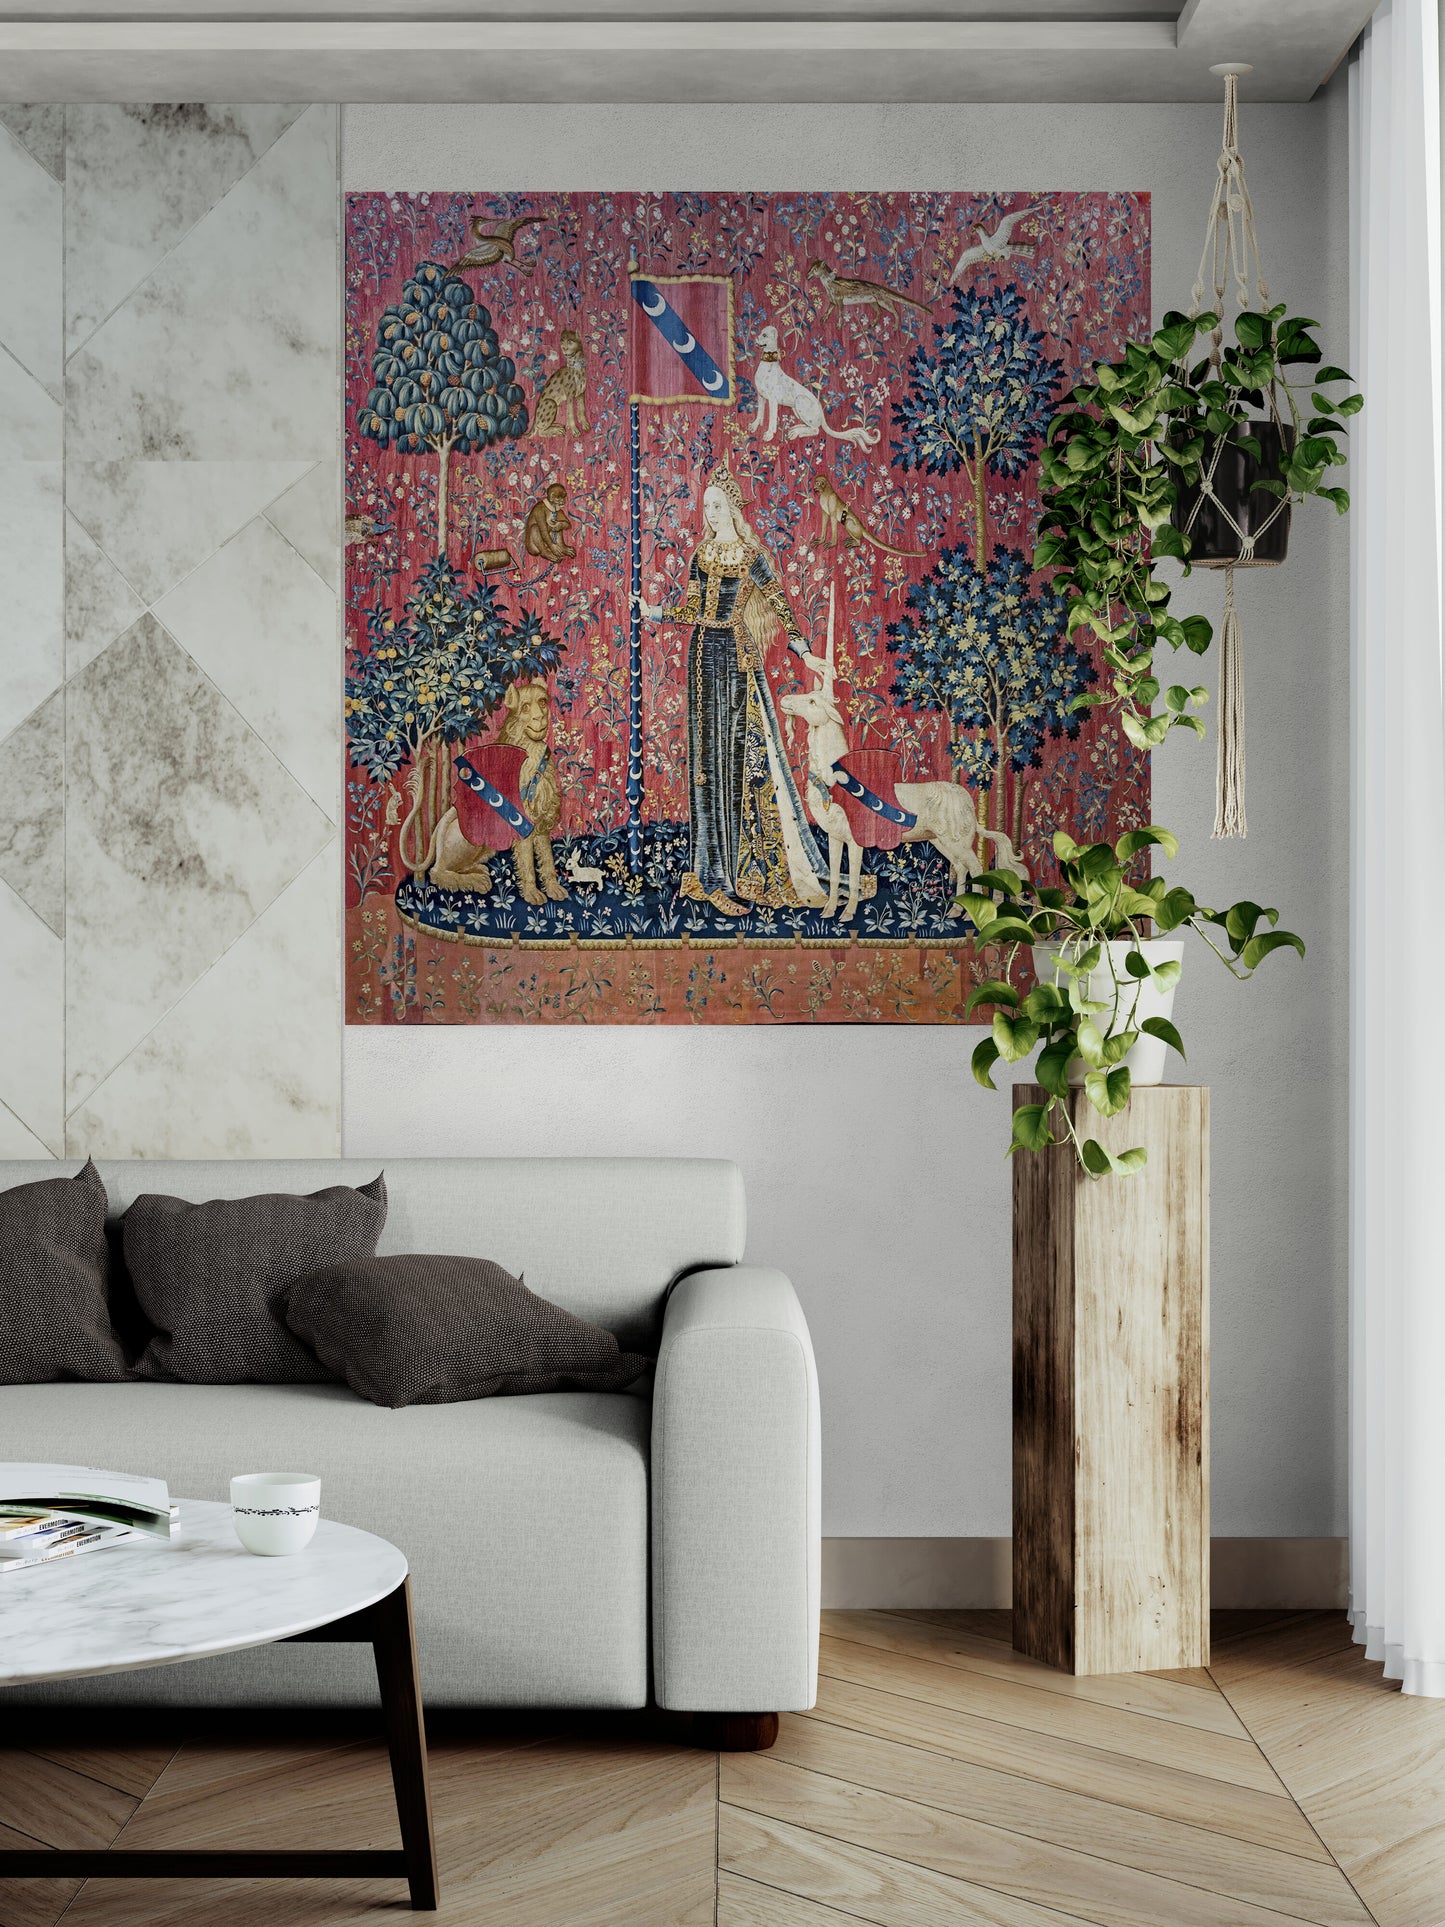 Medieval Tapestry Lady and the Unicorn "Touch" Choice Fabric Print and Woven Tapestry RE893110